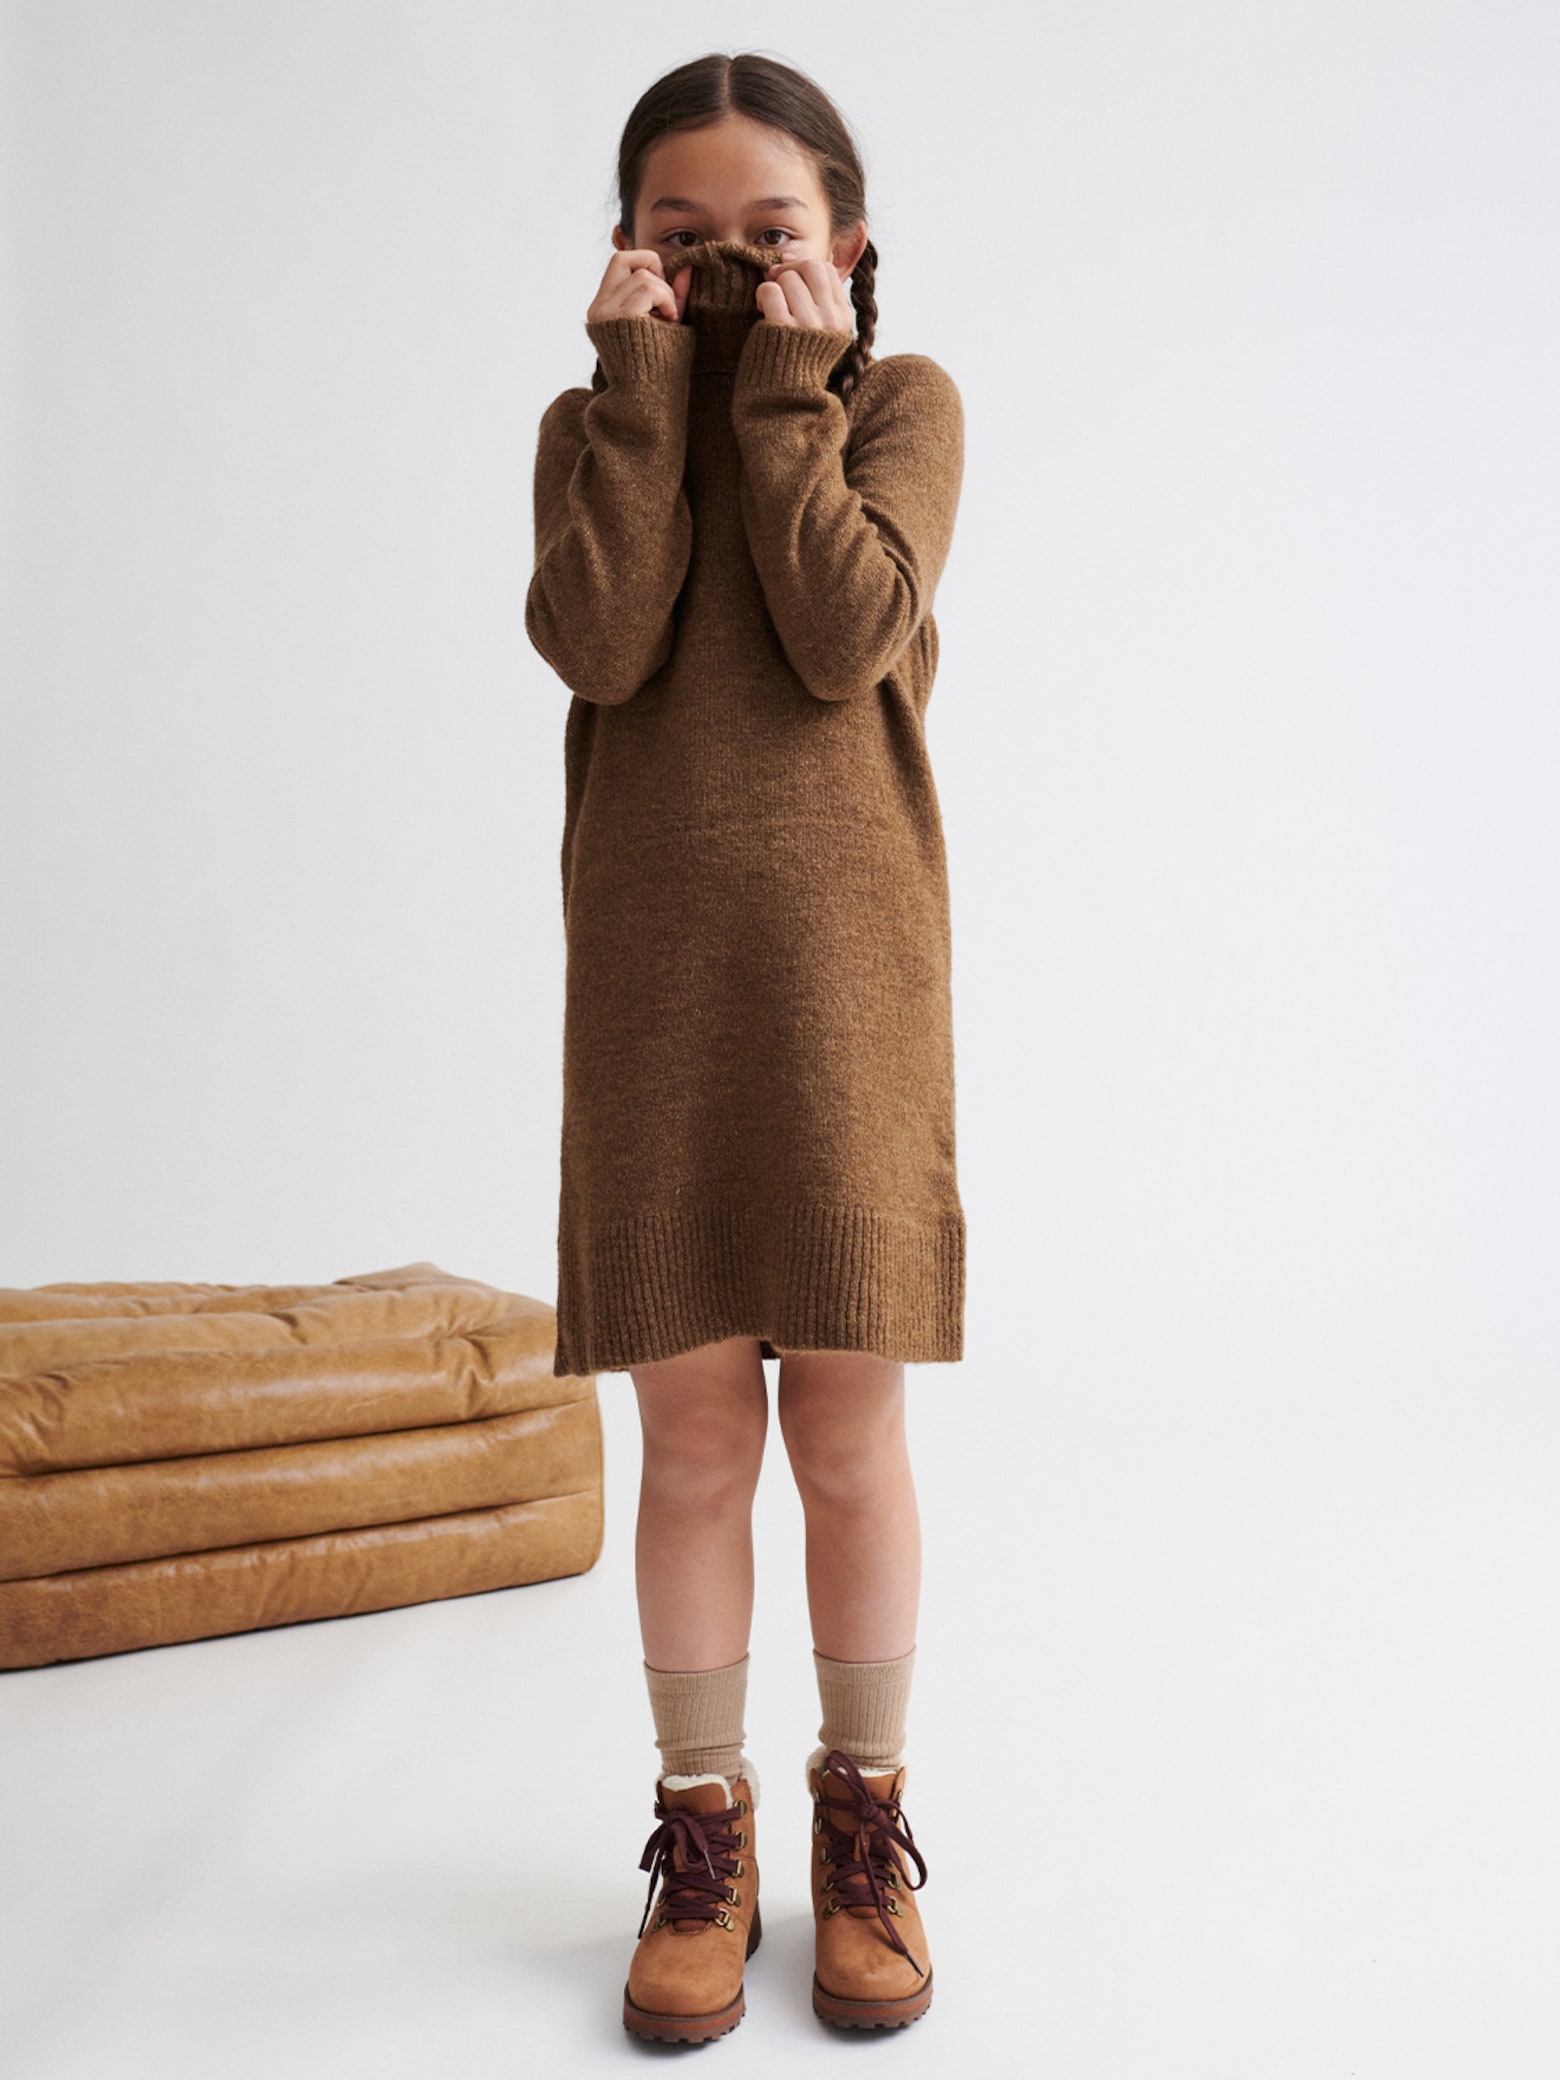 Cool combined Dresses for cooler weather